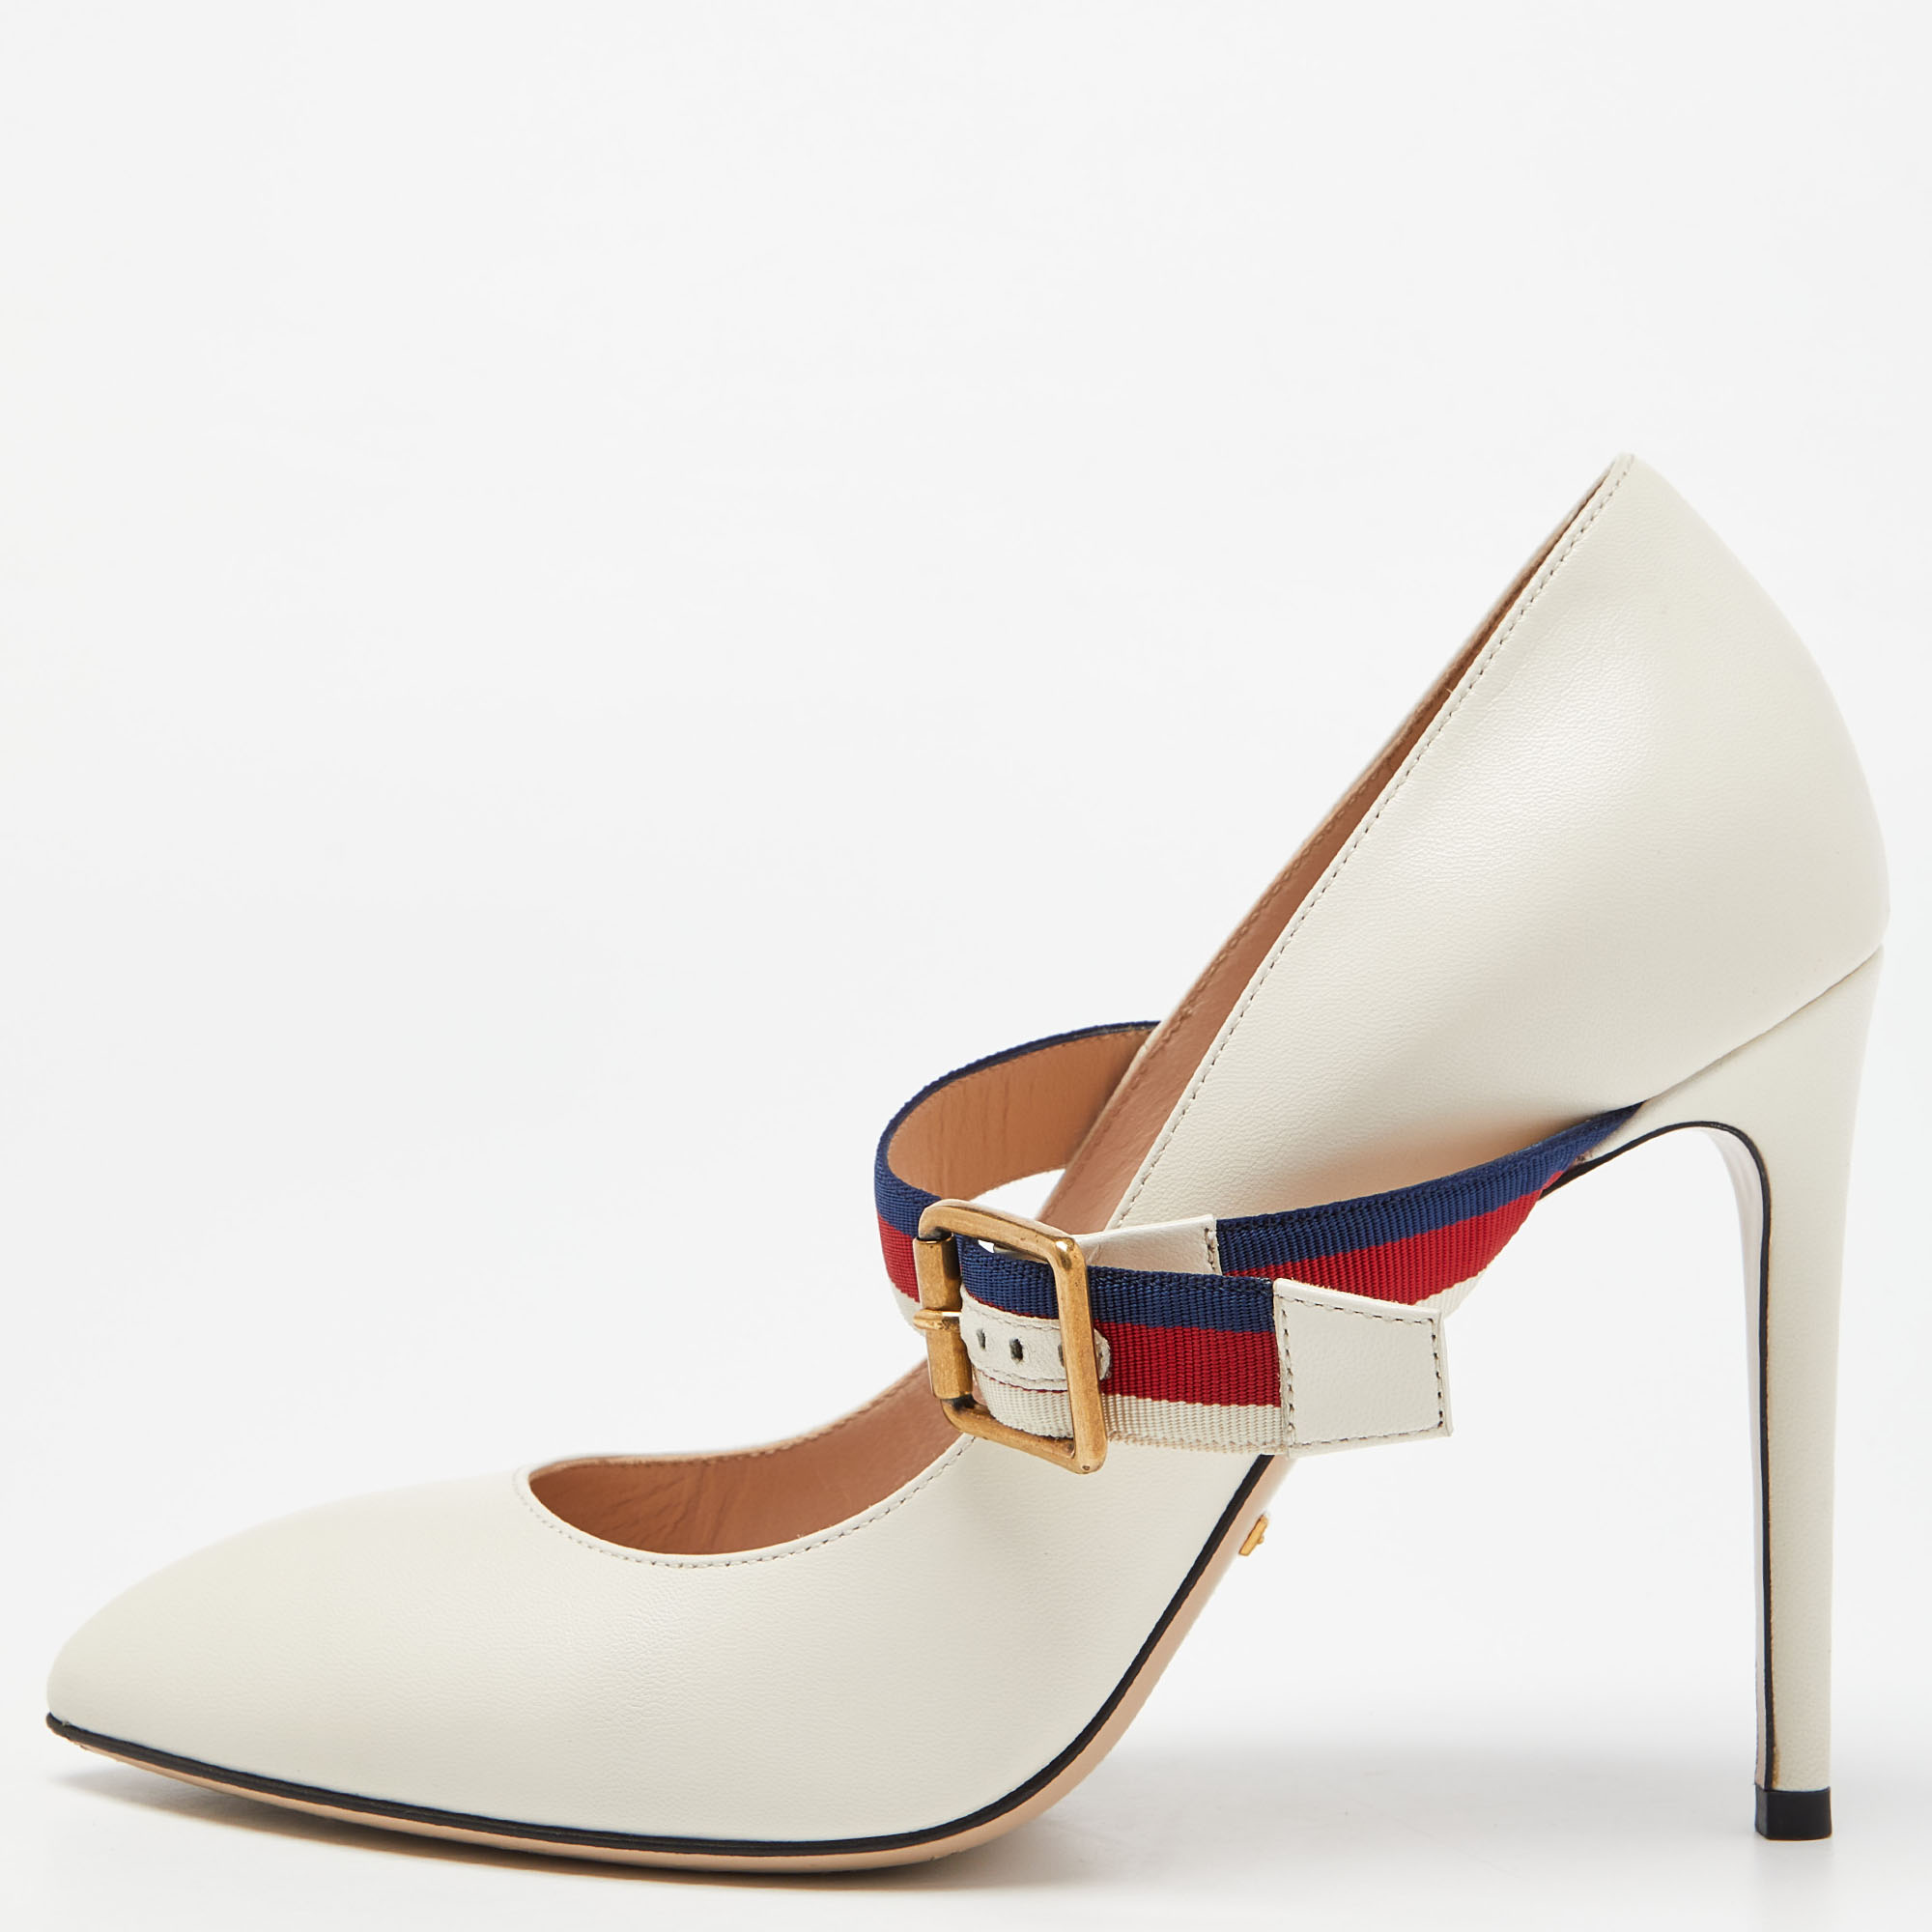 Gucci cream leather sylvie mary jane pumps size 38.5